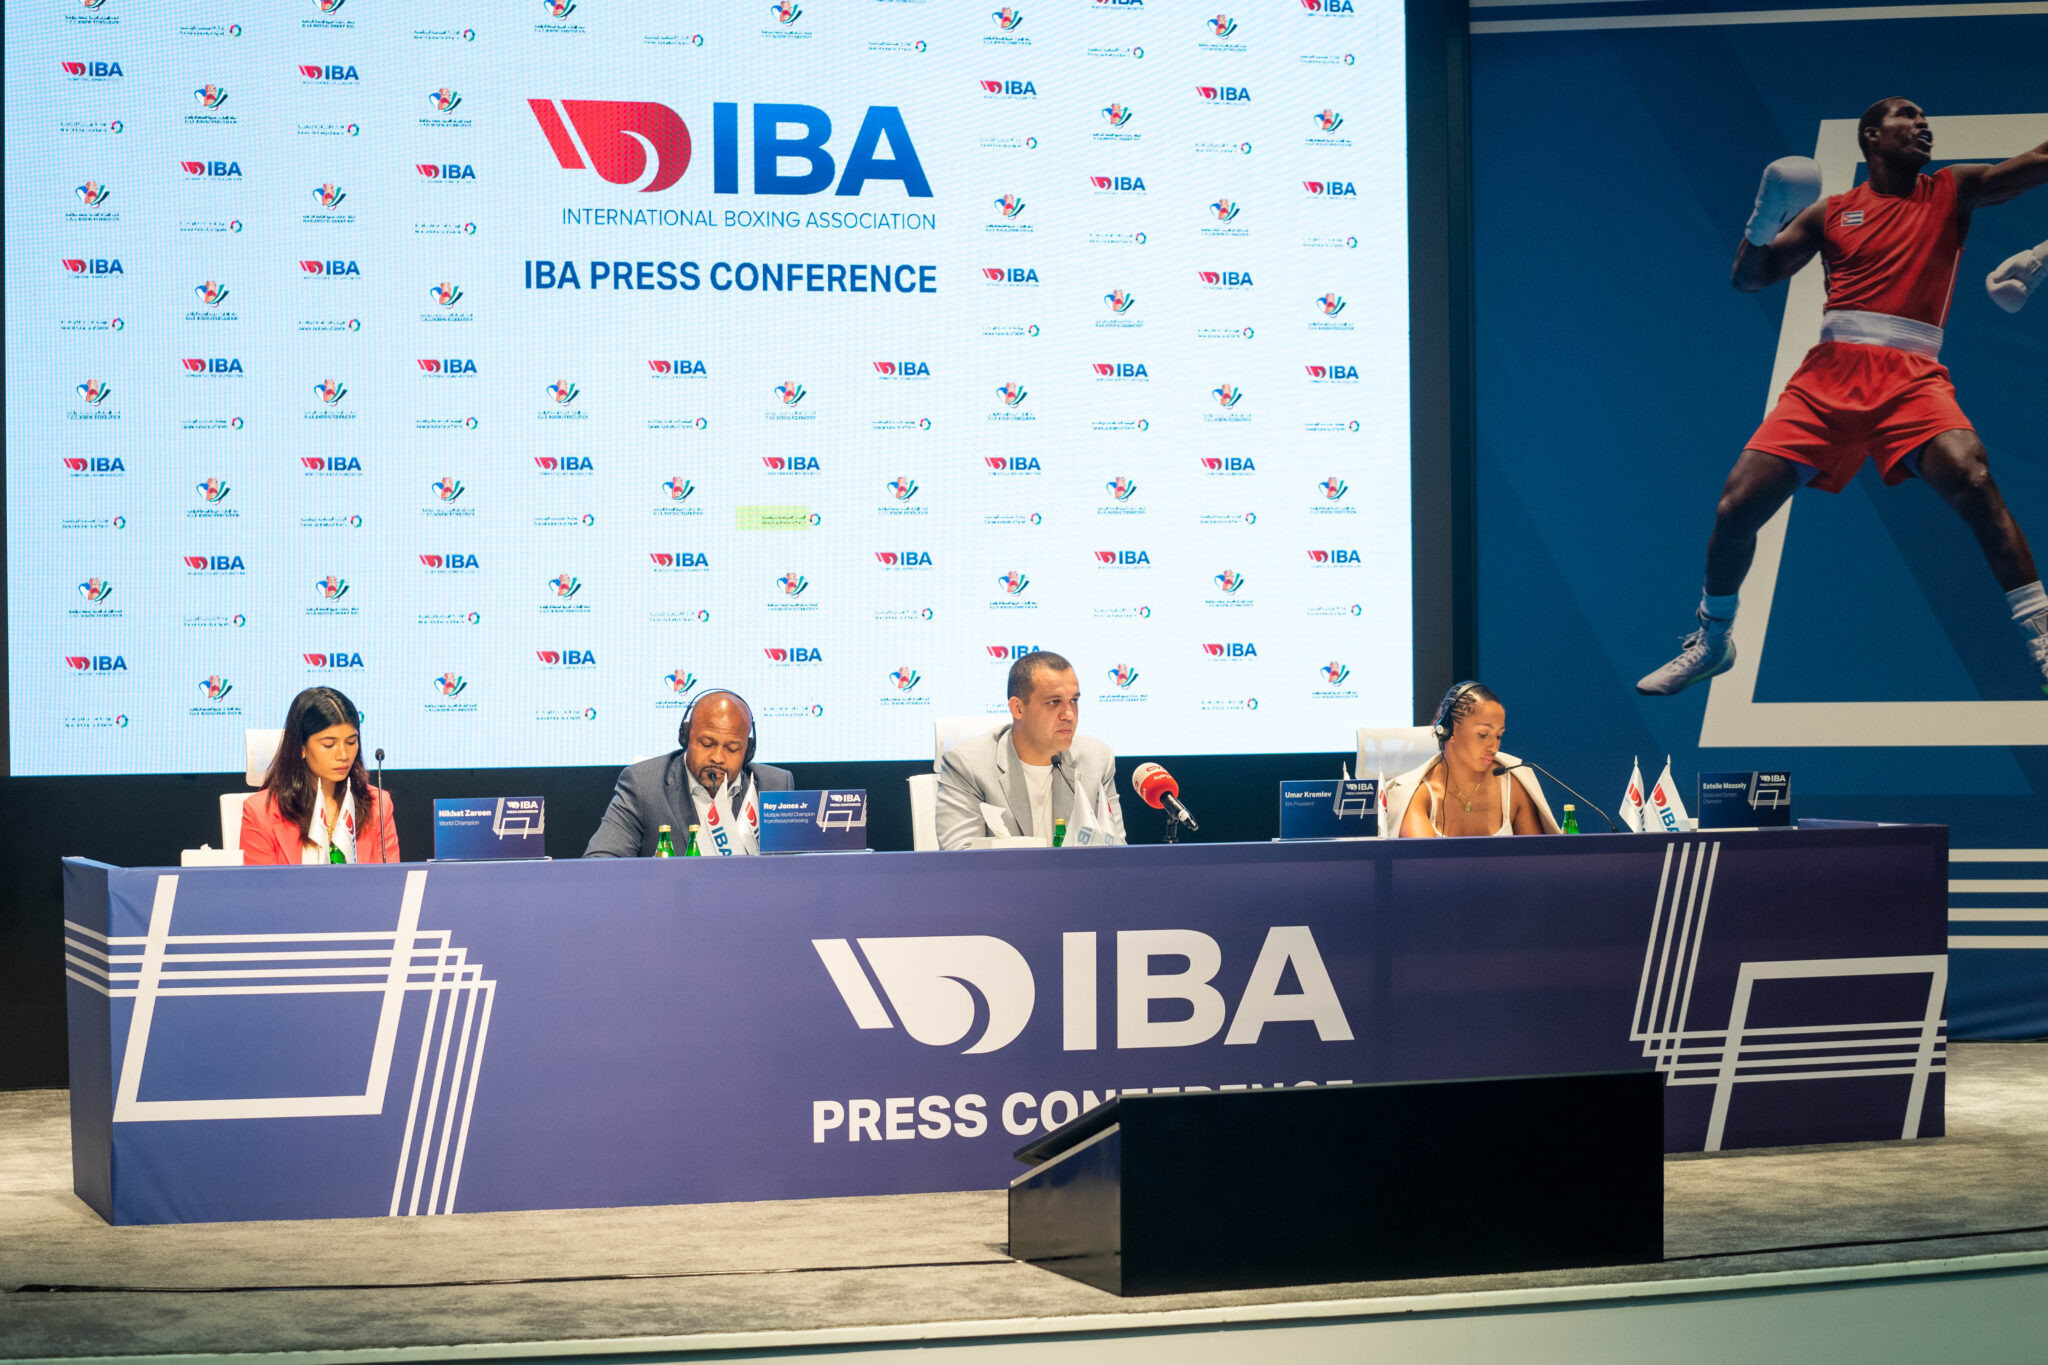 IBA President Kremlev warns of backlash if boxing removed from Olympics